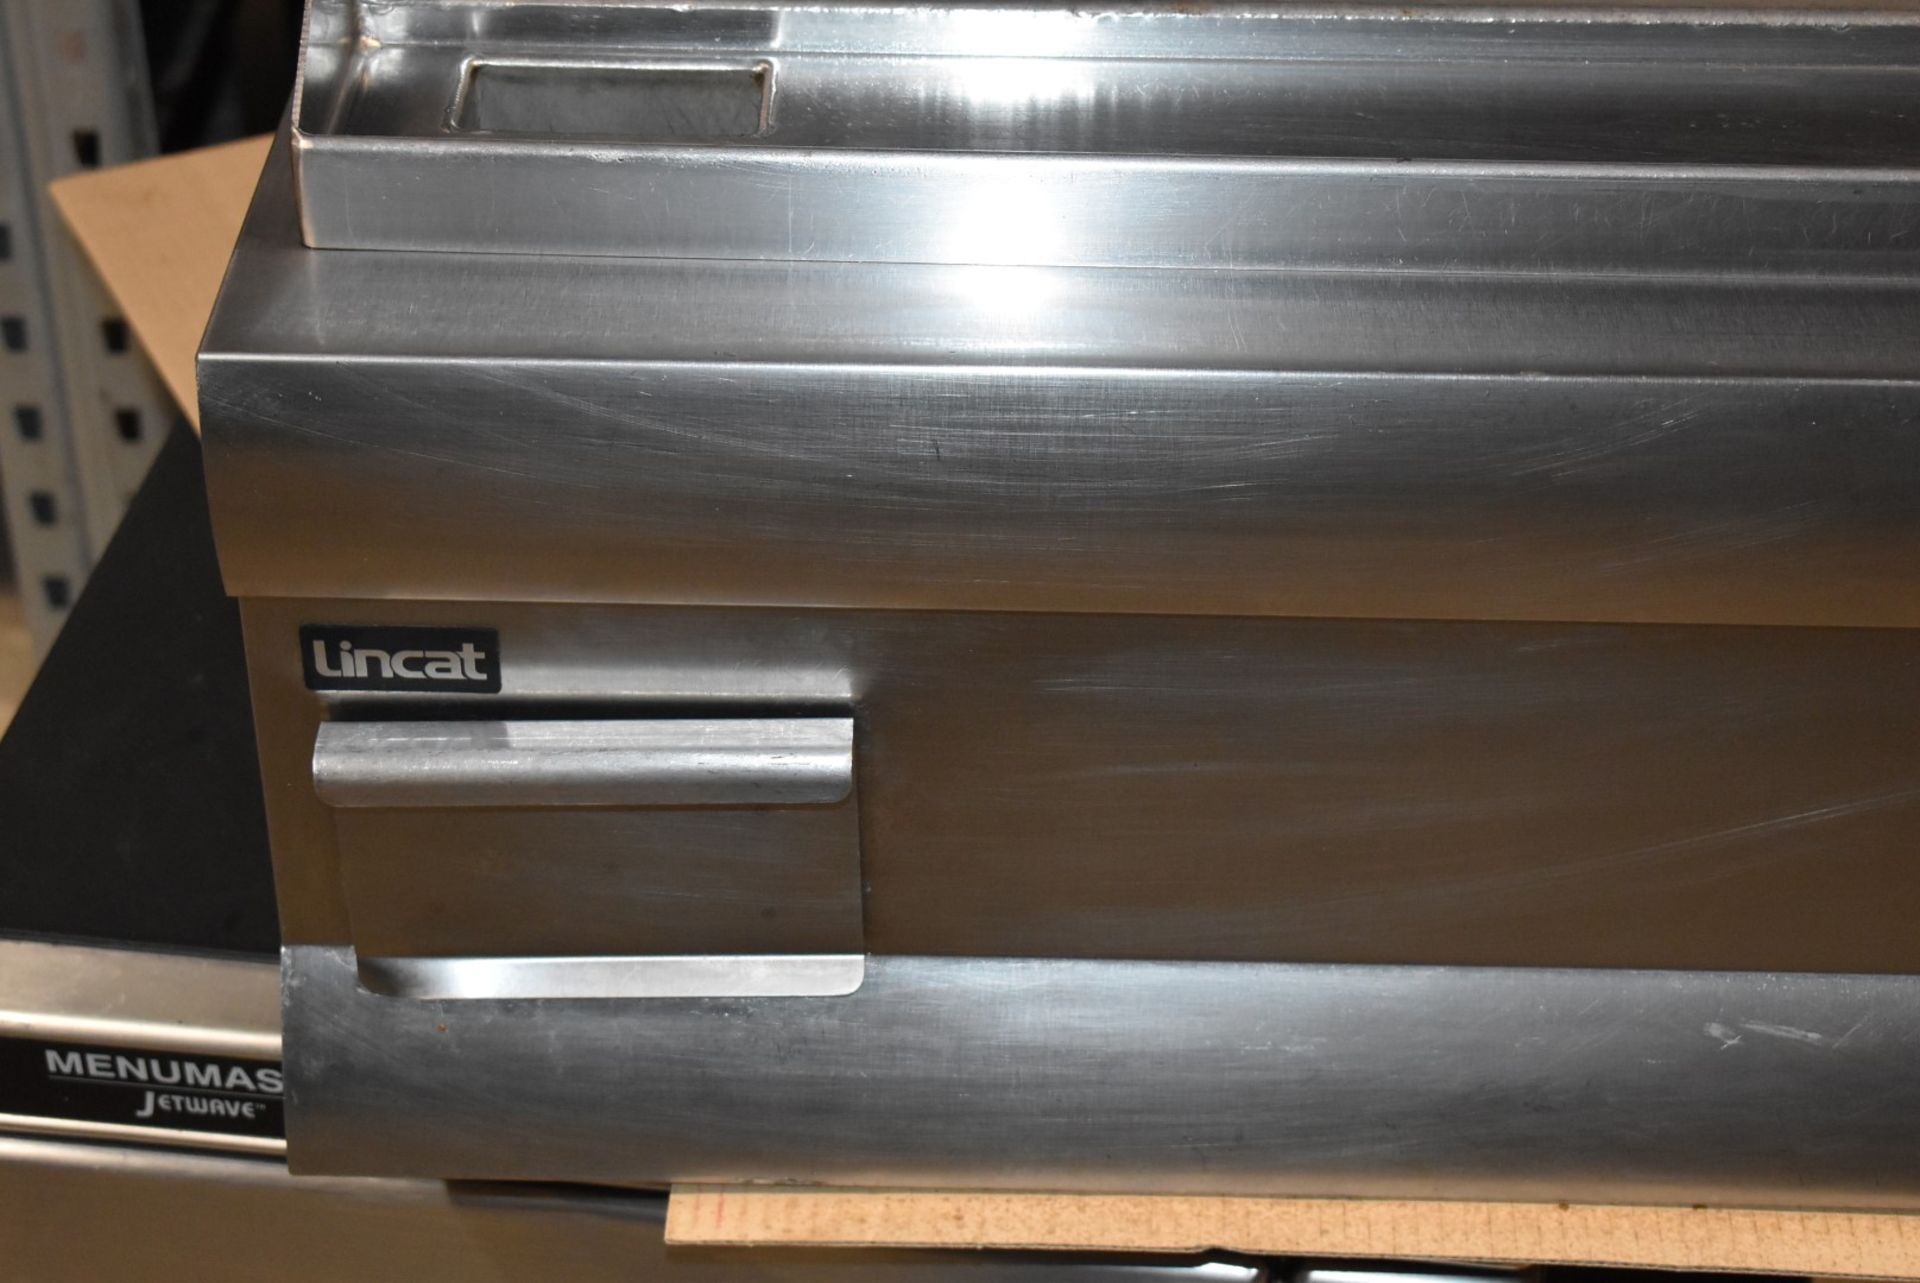 1 x Lincat Silverlink 900 GS9 Steel Top Griddle Cooker - RRP £875 - Ref: WH2-119 B3F - CL999 - 900mm - Image 9 of 11